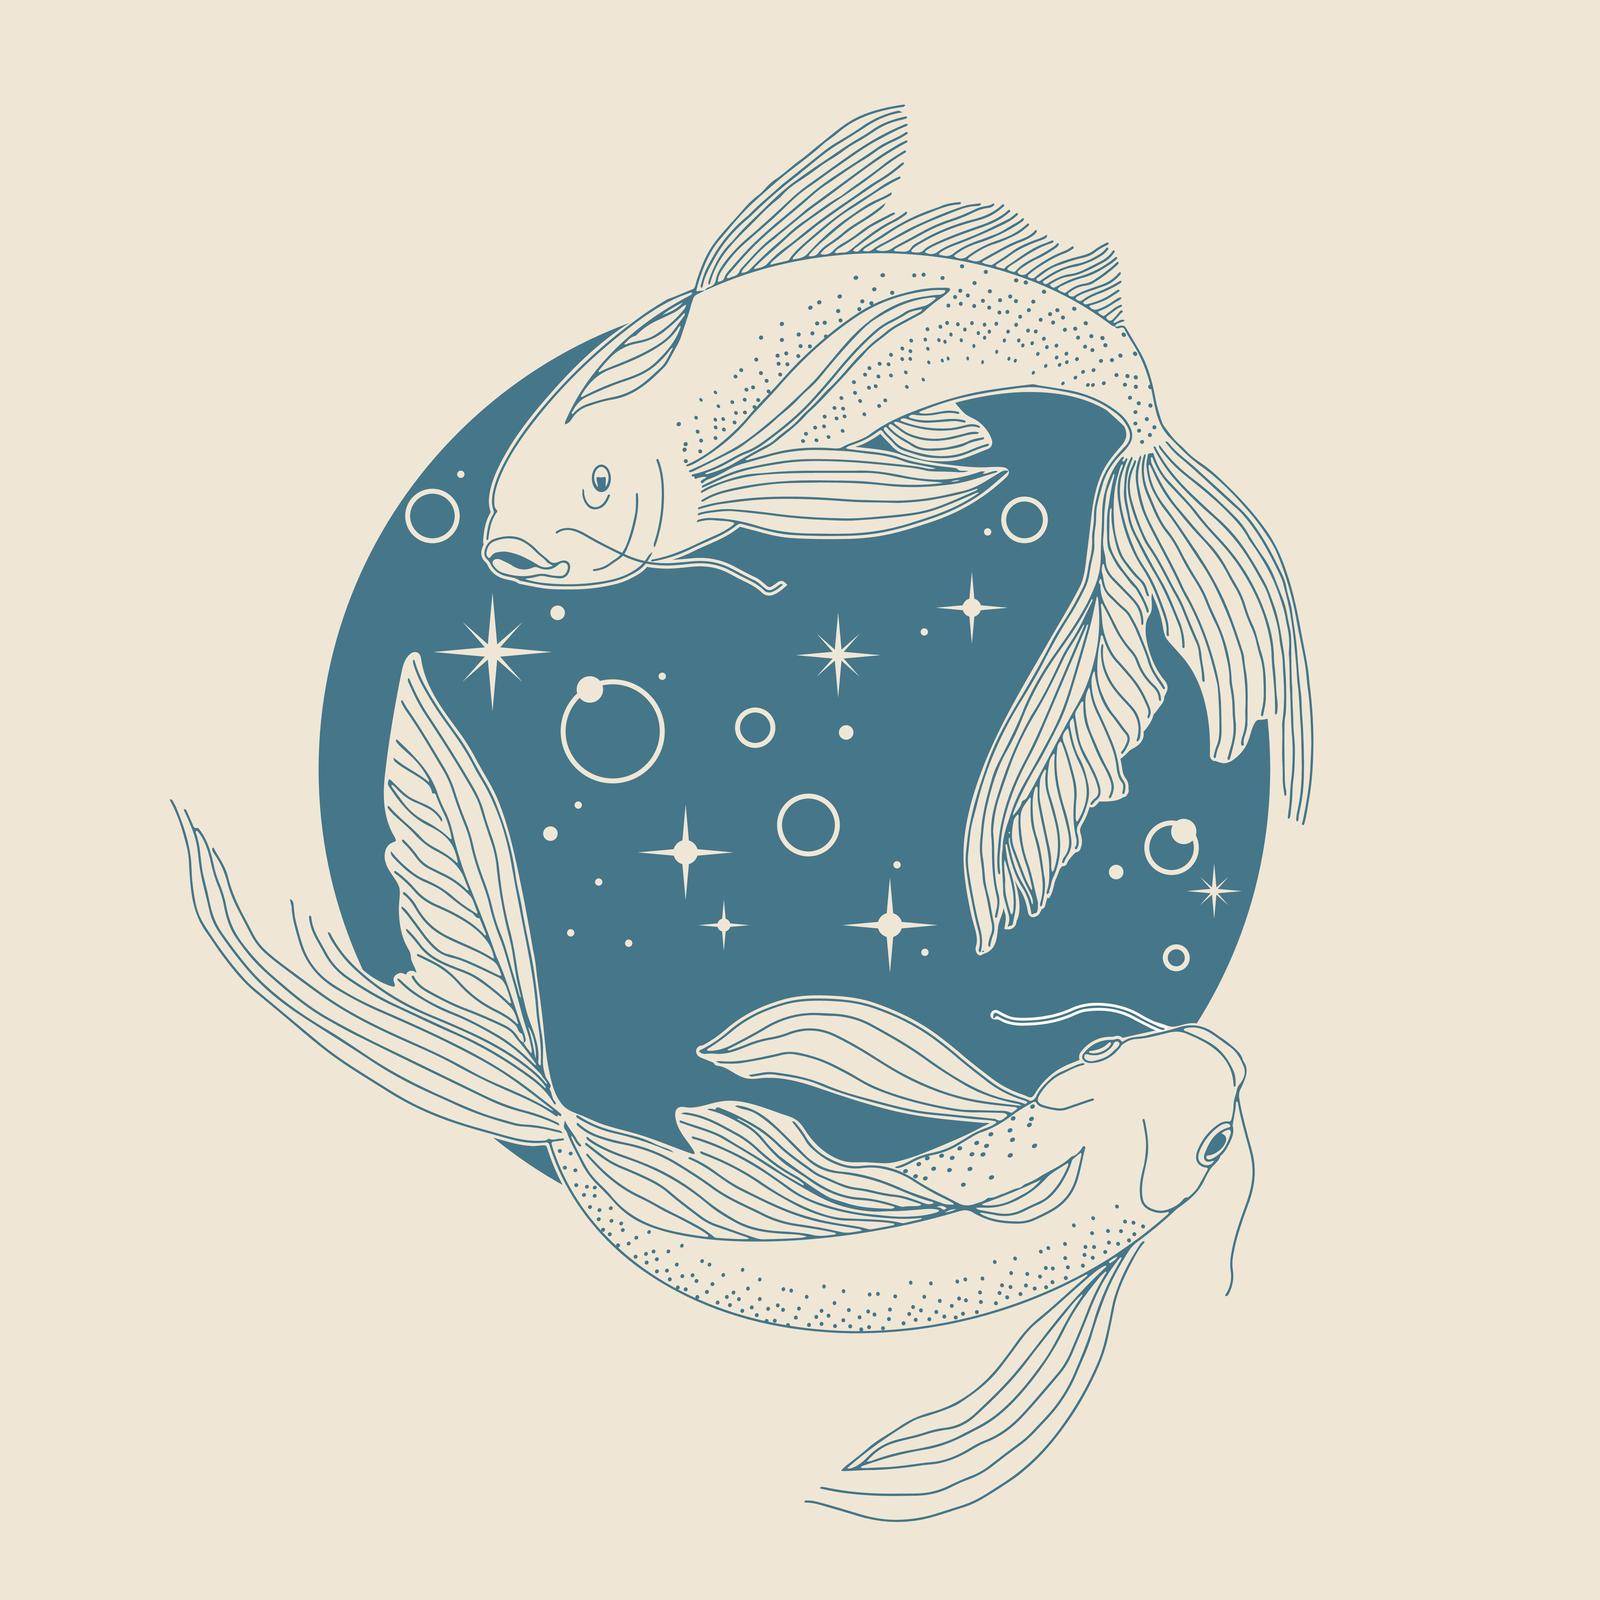 Fantastic celestial fish swimming in space. Vector esoteric illustration.